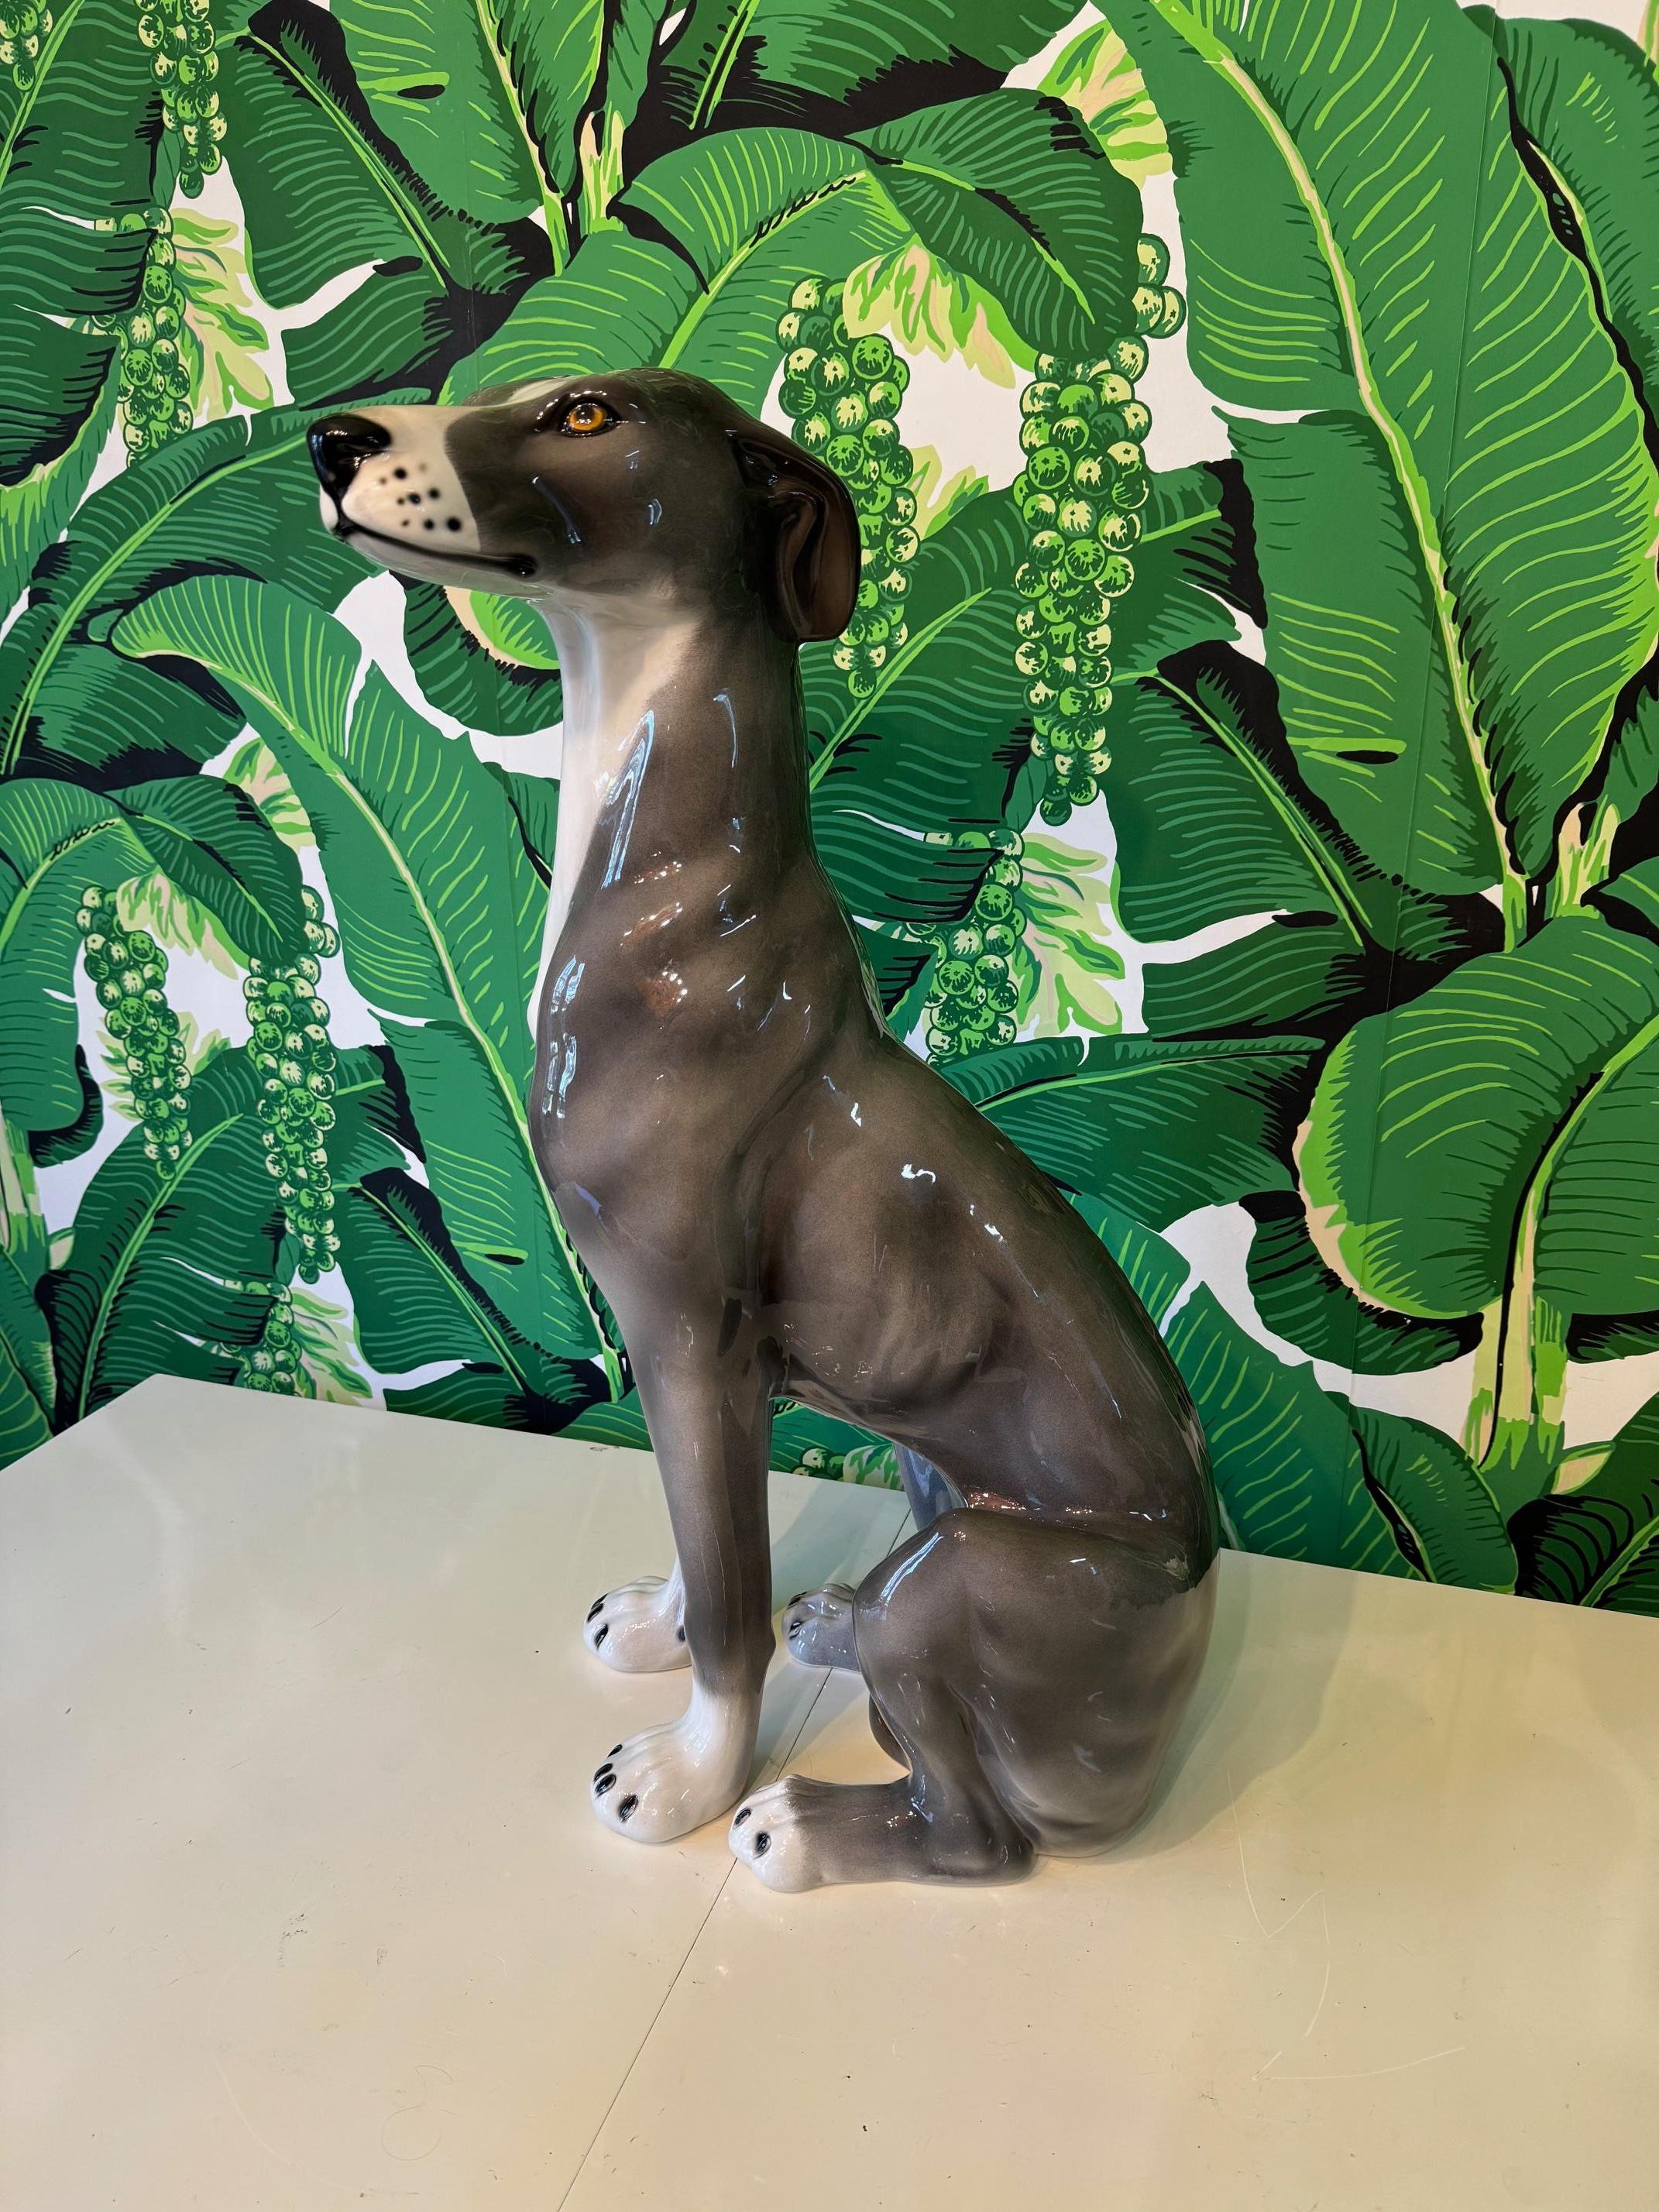 Large ceramic greyhound dog statue features life-like features and a high gloss finish. Very good condition with no cracks or chips.
For a shipping quote to your exact zip code, please message us.
